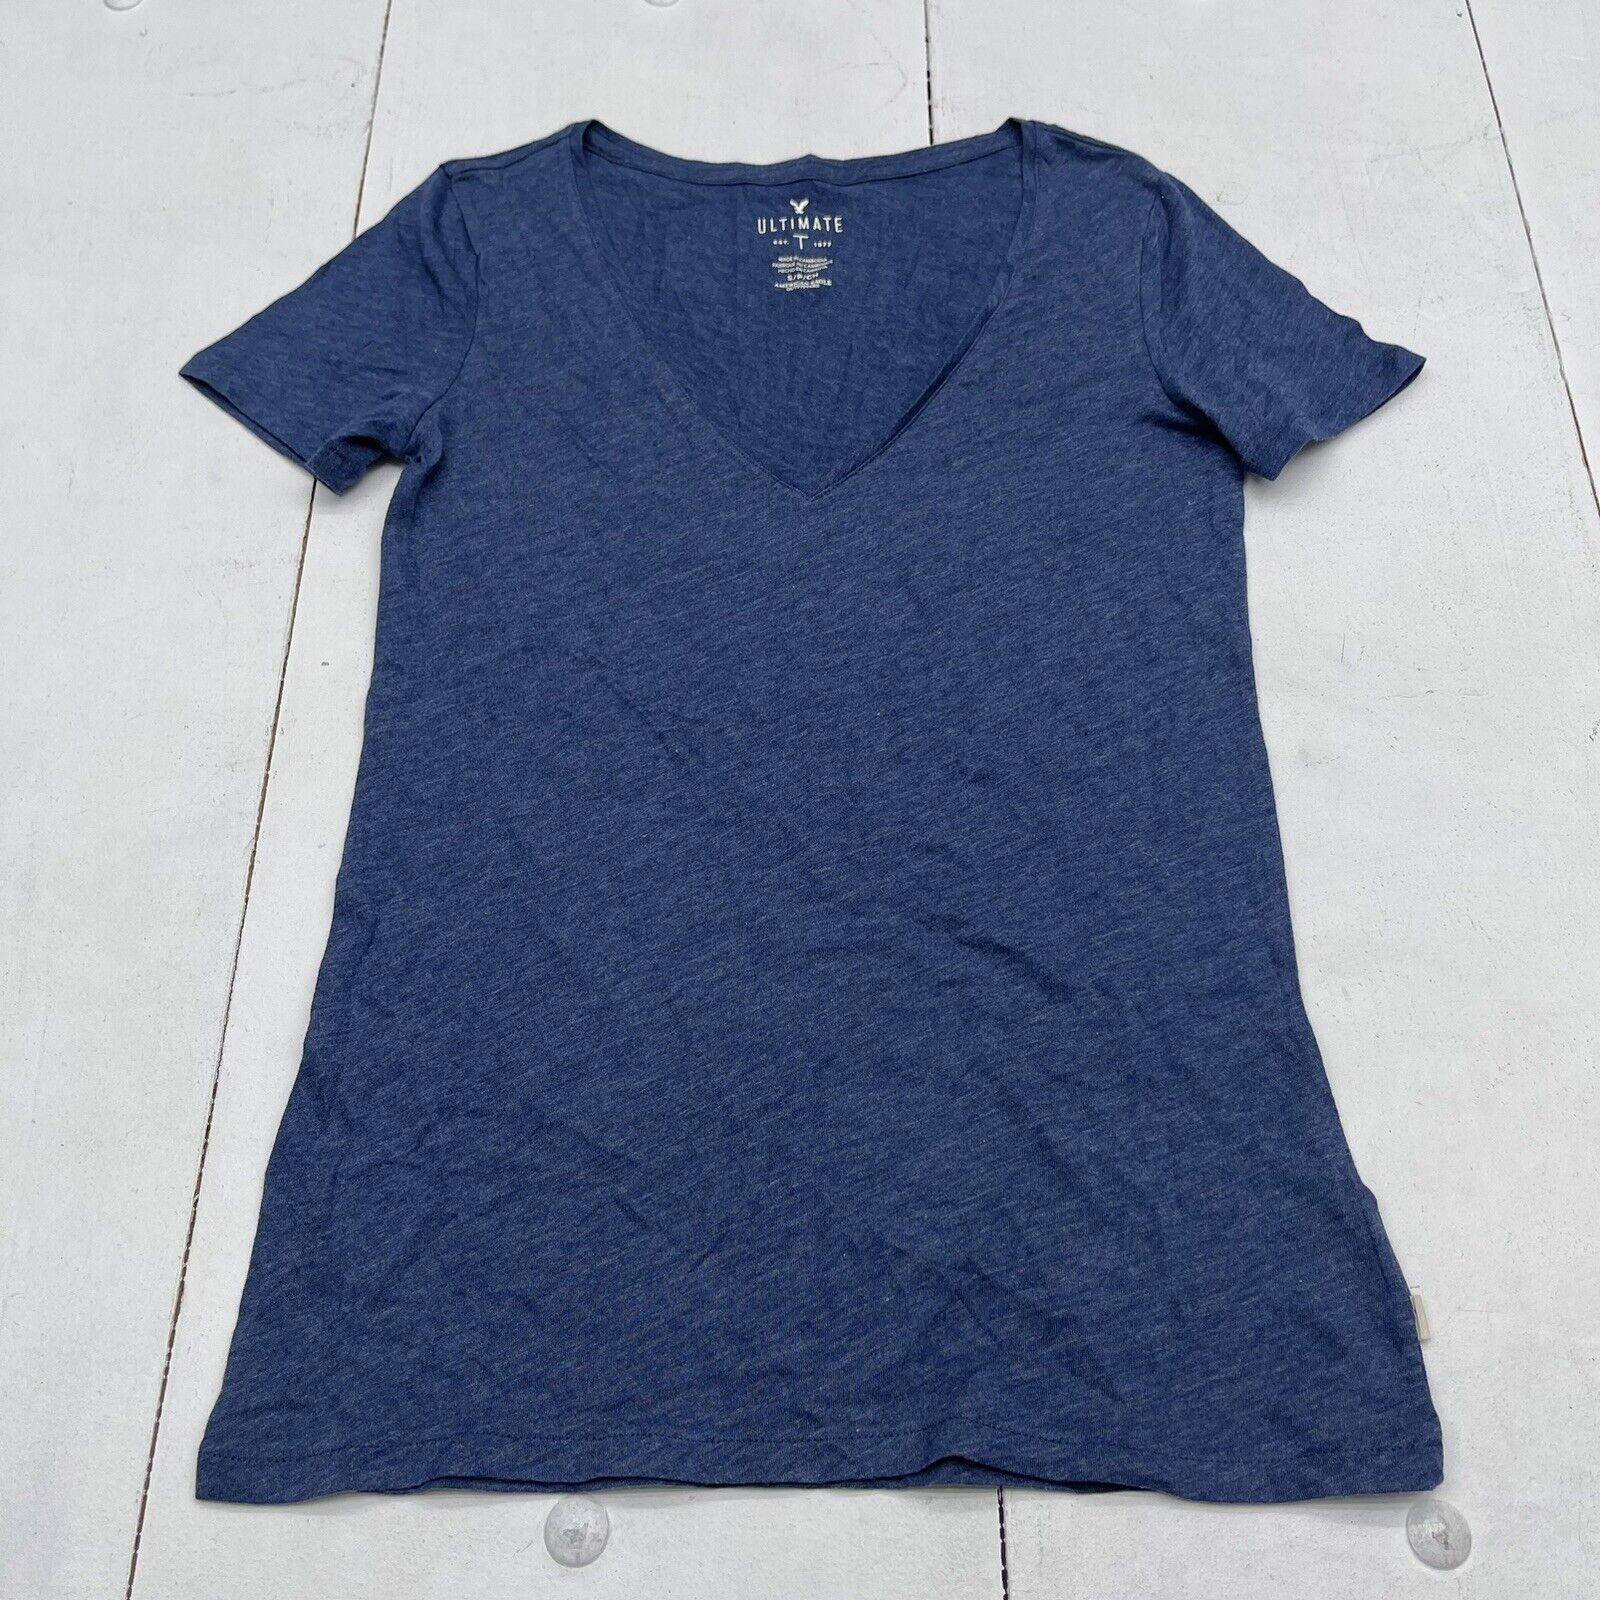 American Eagle Ultimate Blue Short Sleeve Tee Women’s Size Small